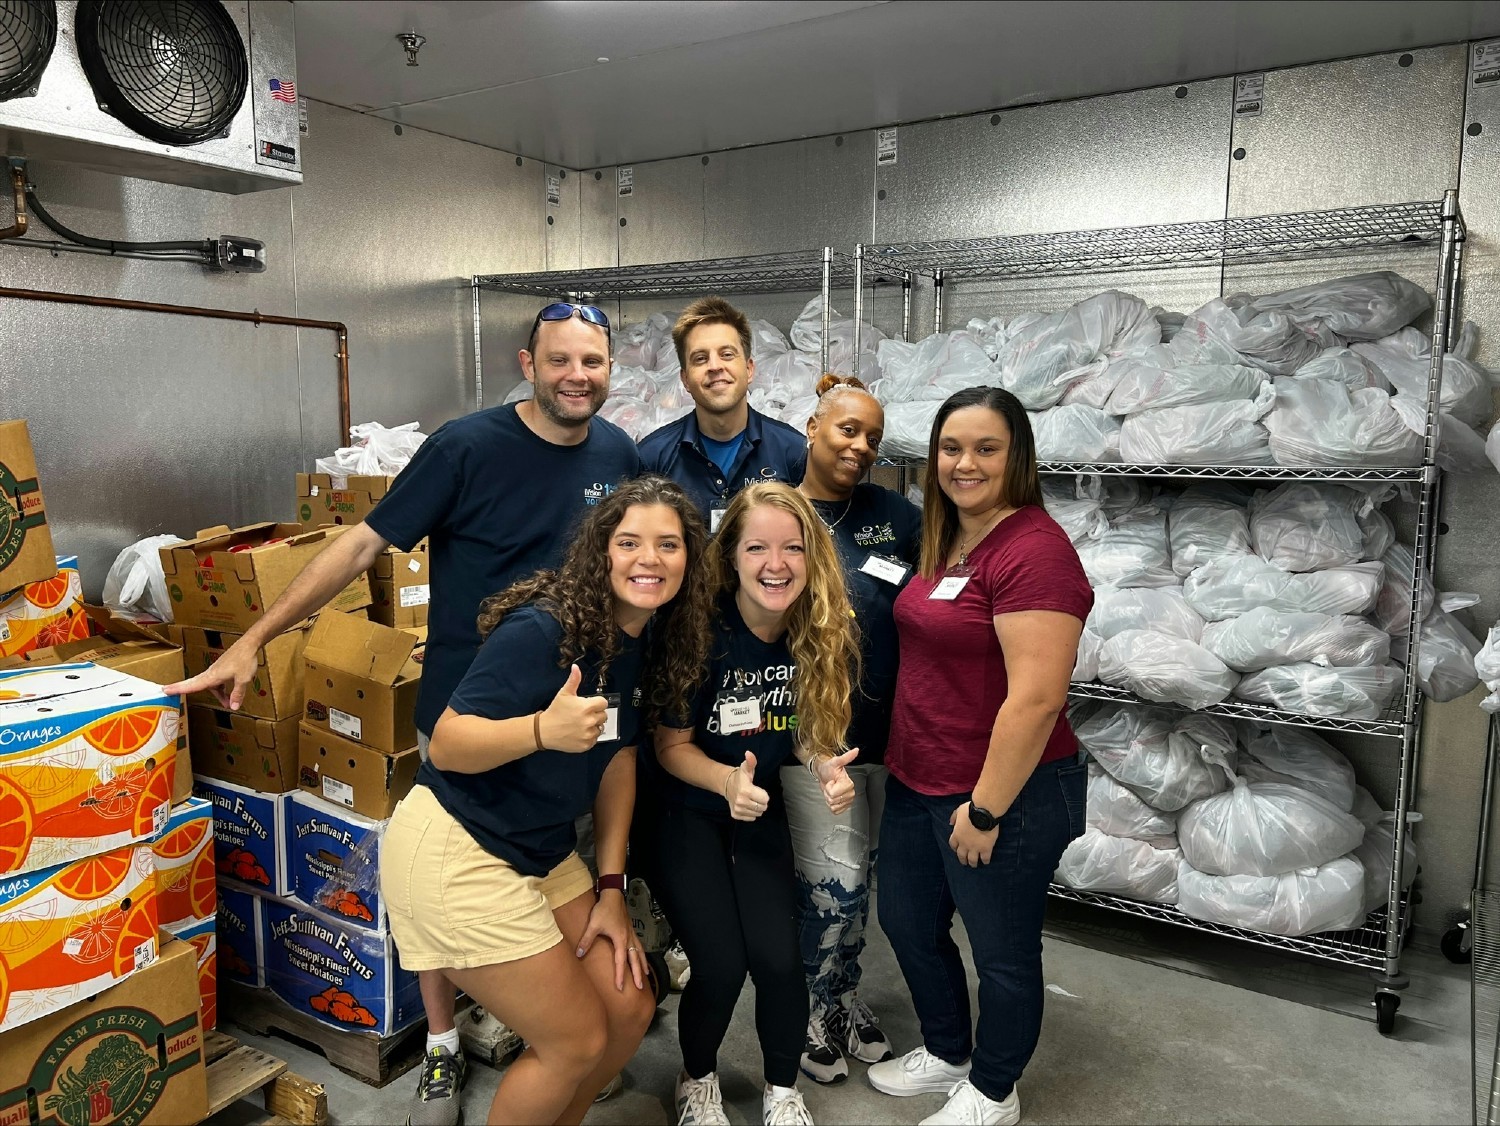 Team members volunteer at a Georgia food pantry to pack and organize over 260 bags of fresh produce and food.